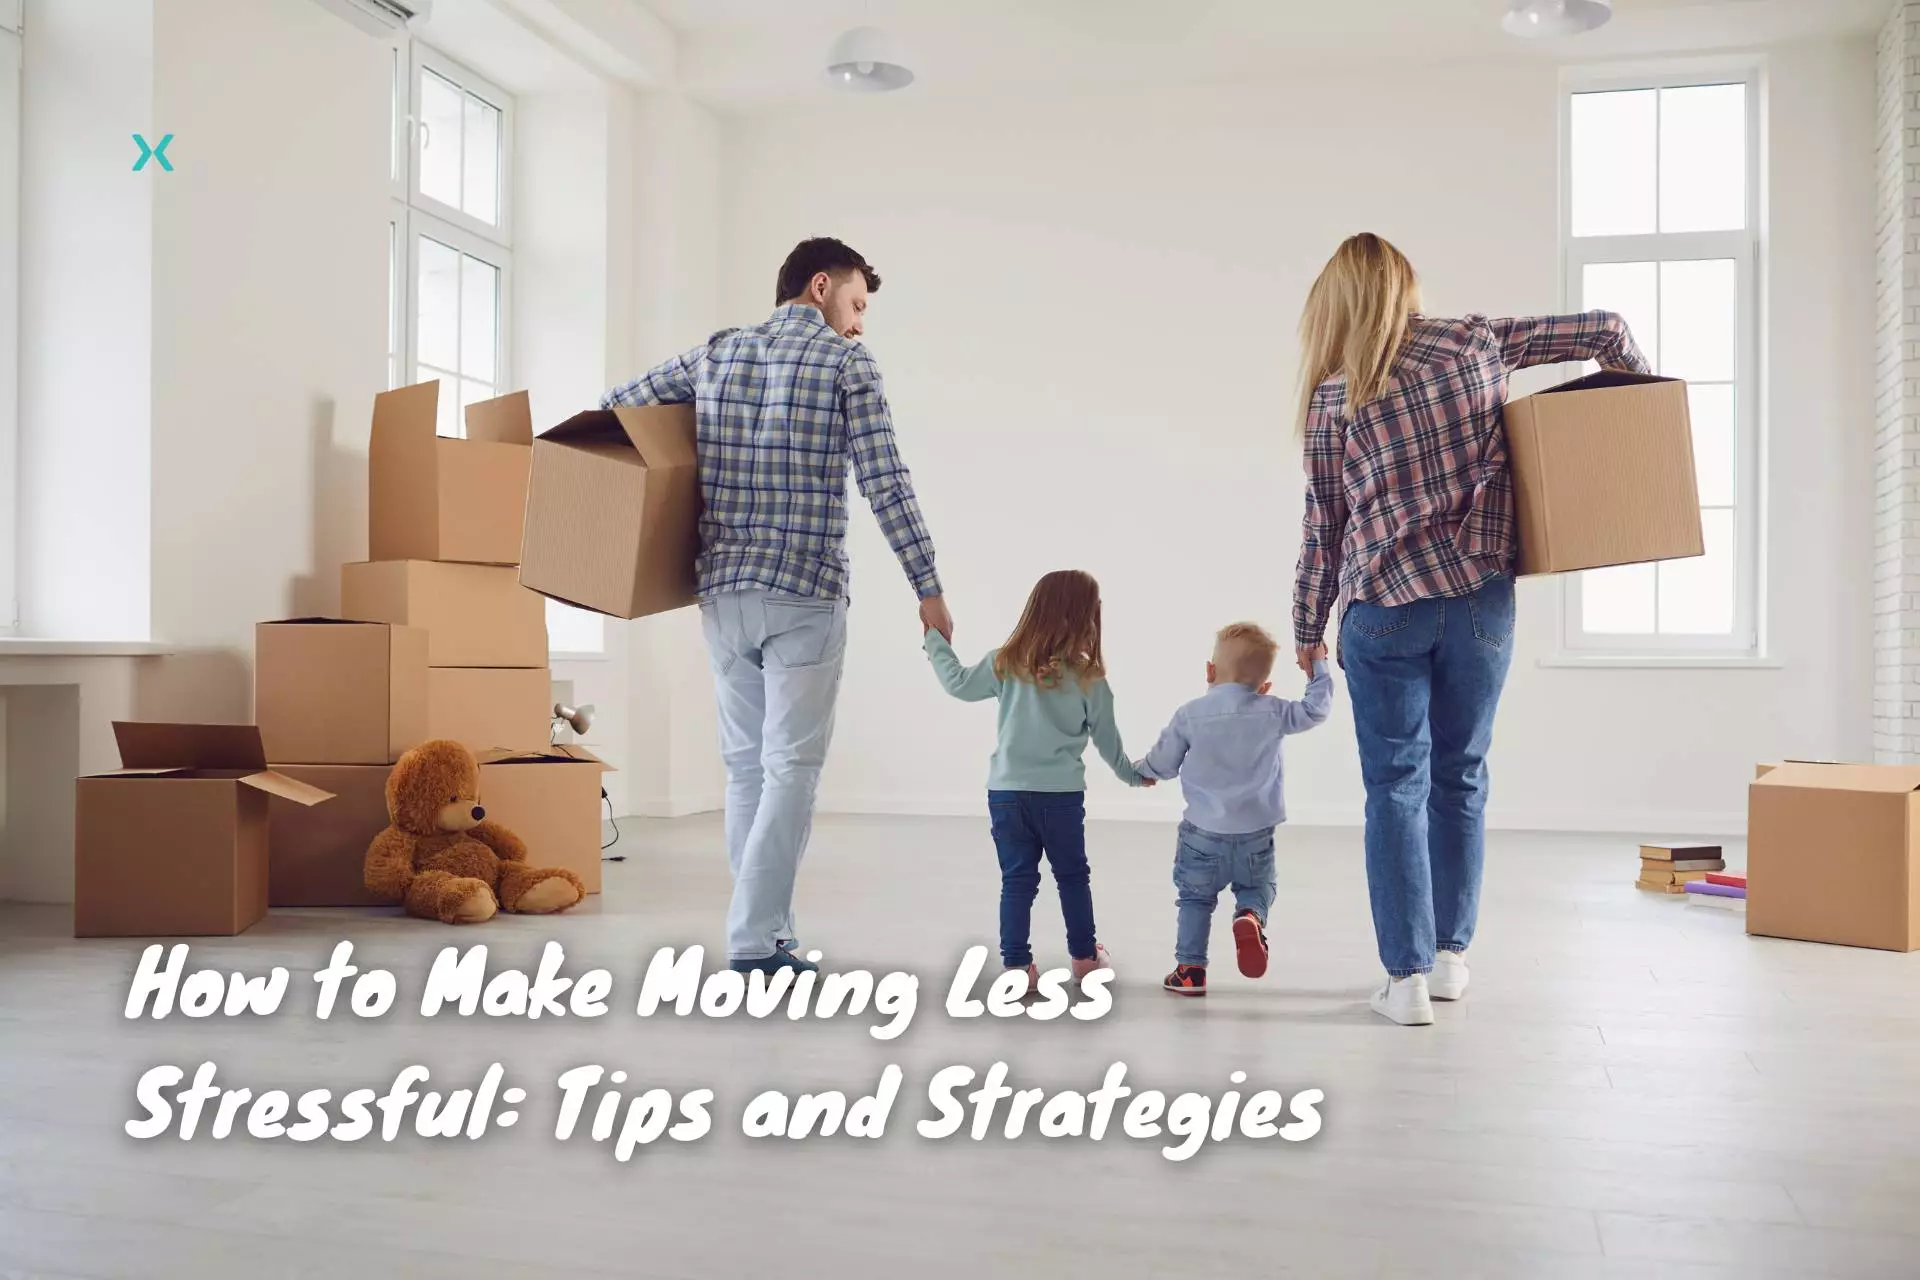 How to Make Moving Less Stressful Tips and Strategies